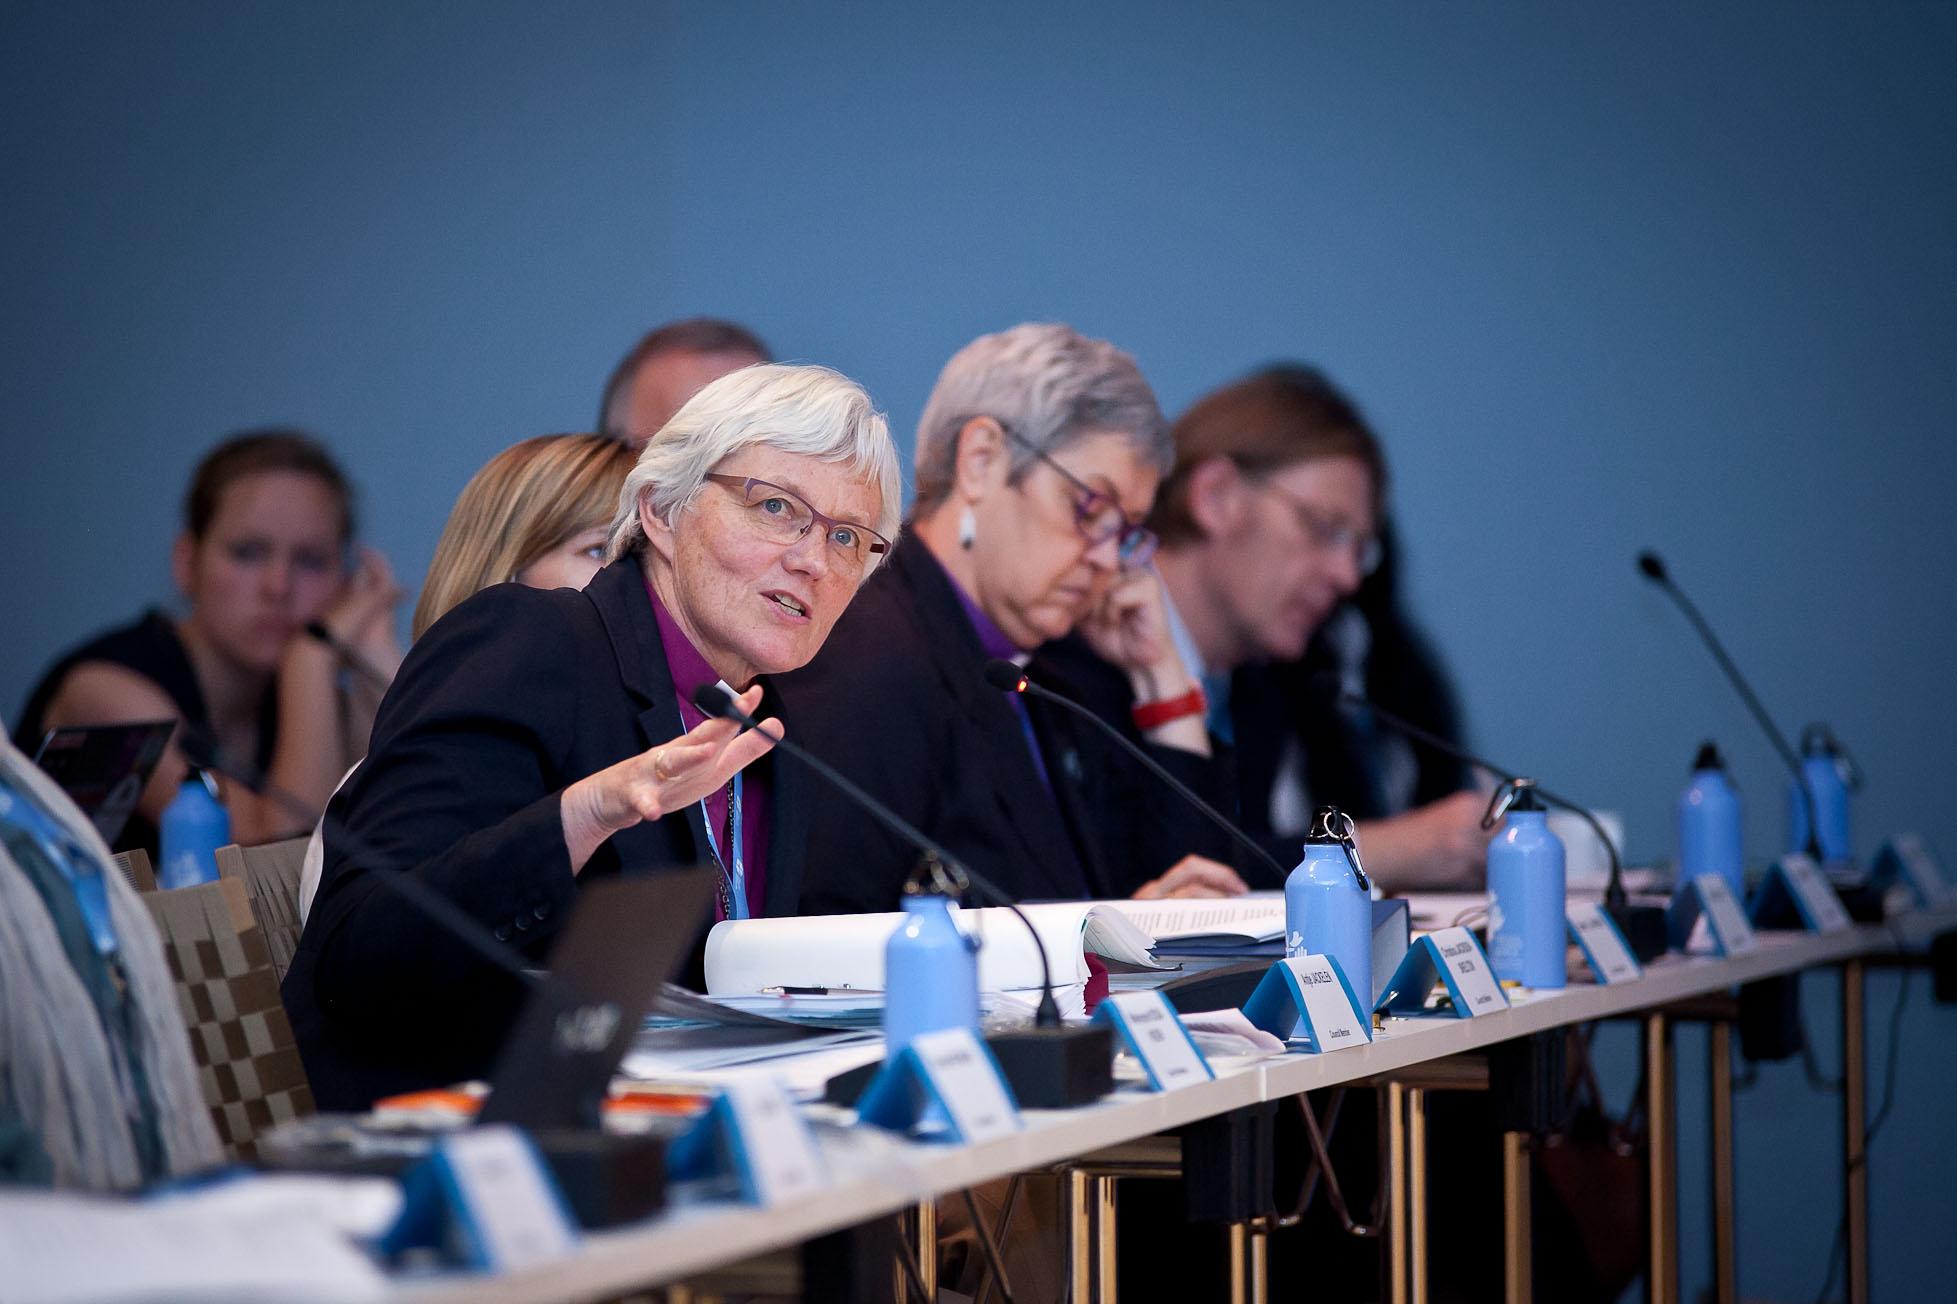 Archbishop Dr Antje JackelÃ©n speaks during the 2016 Council meeting.  Photo: LWF/Marko Schoeneberg.